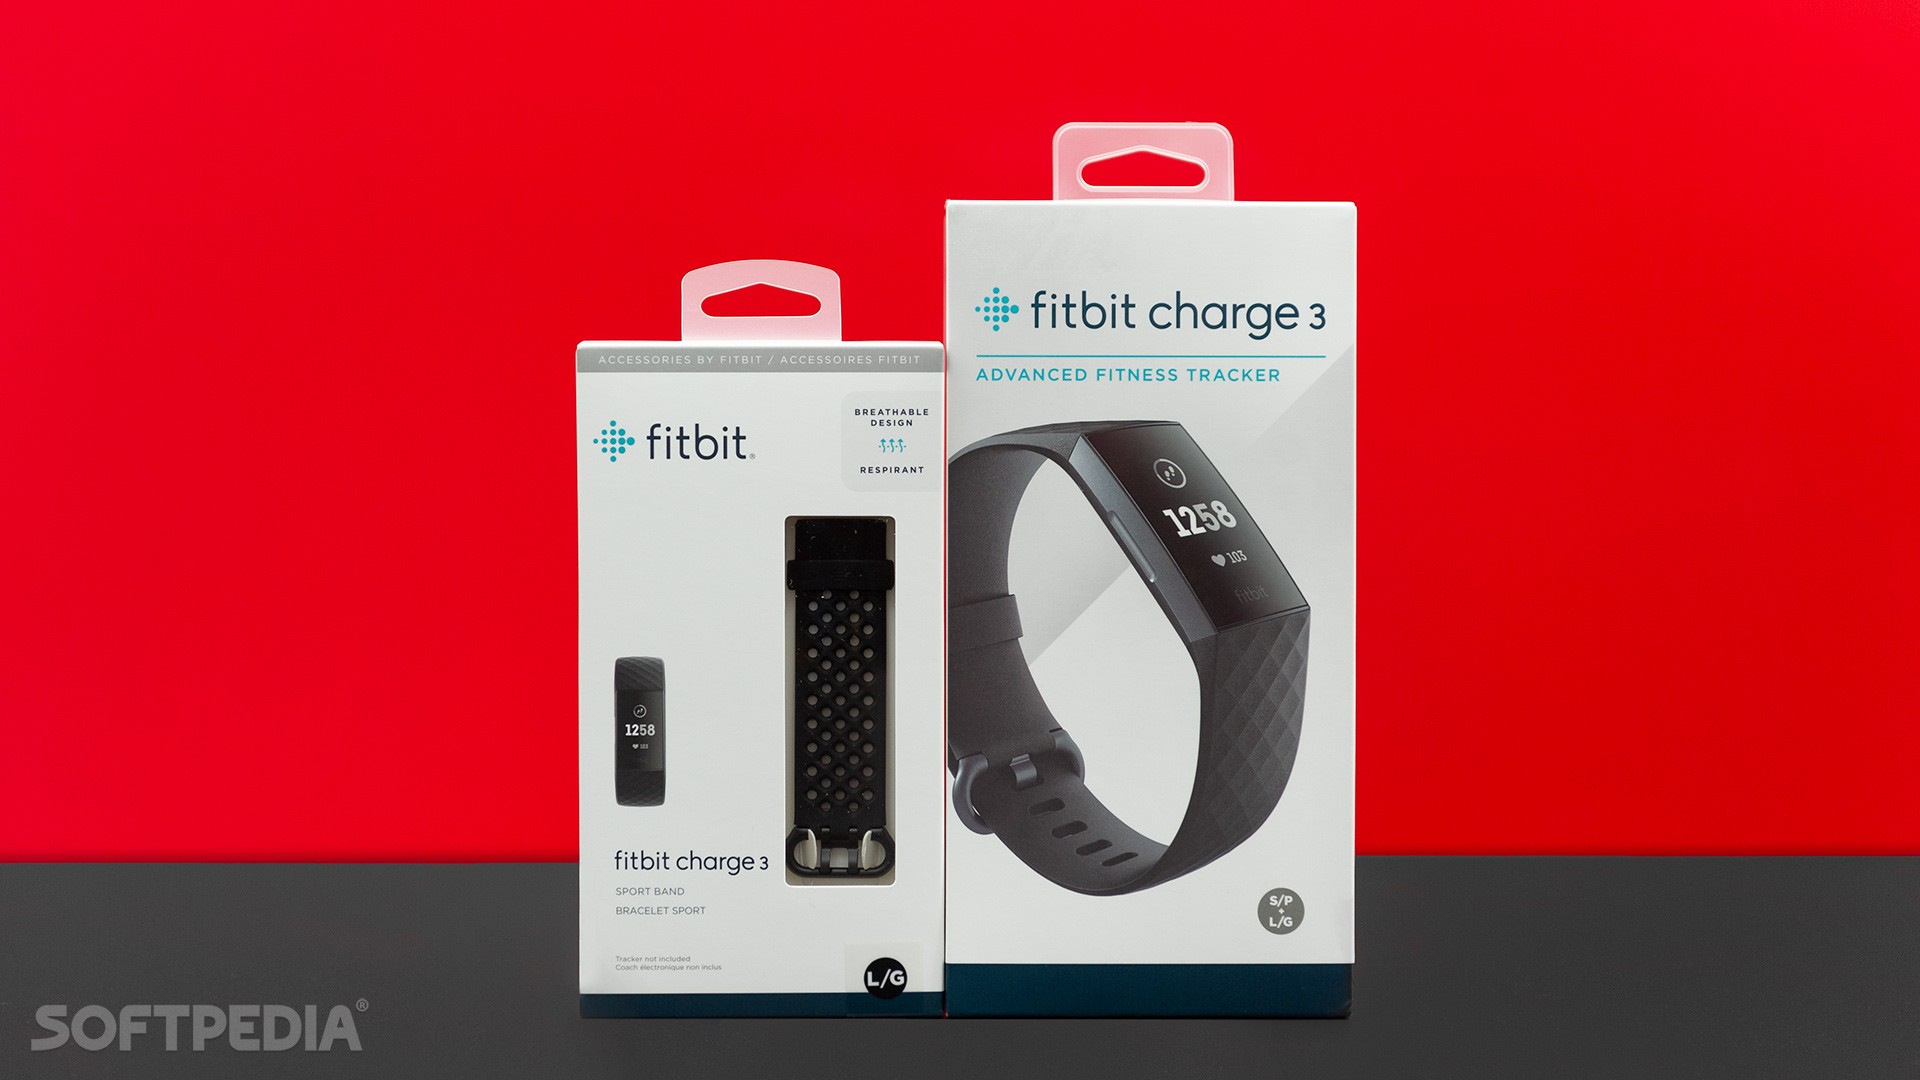 fitbit charge 3 advanced fitness tracker reviews